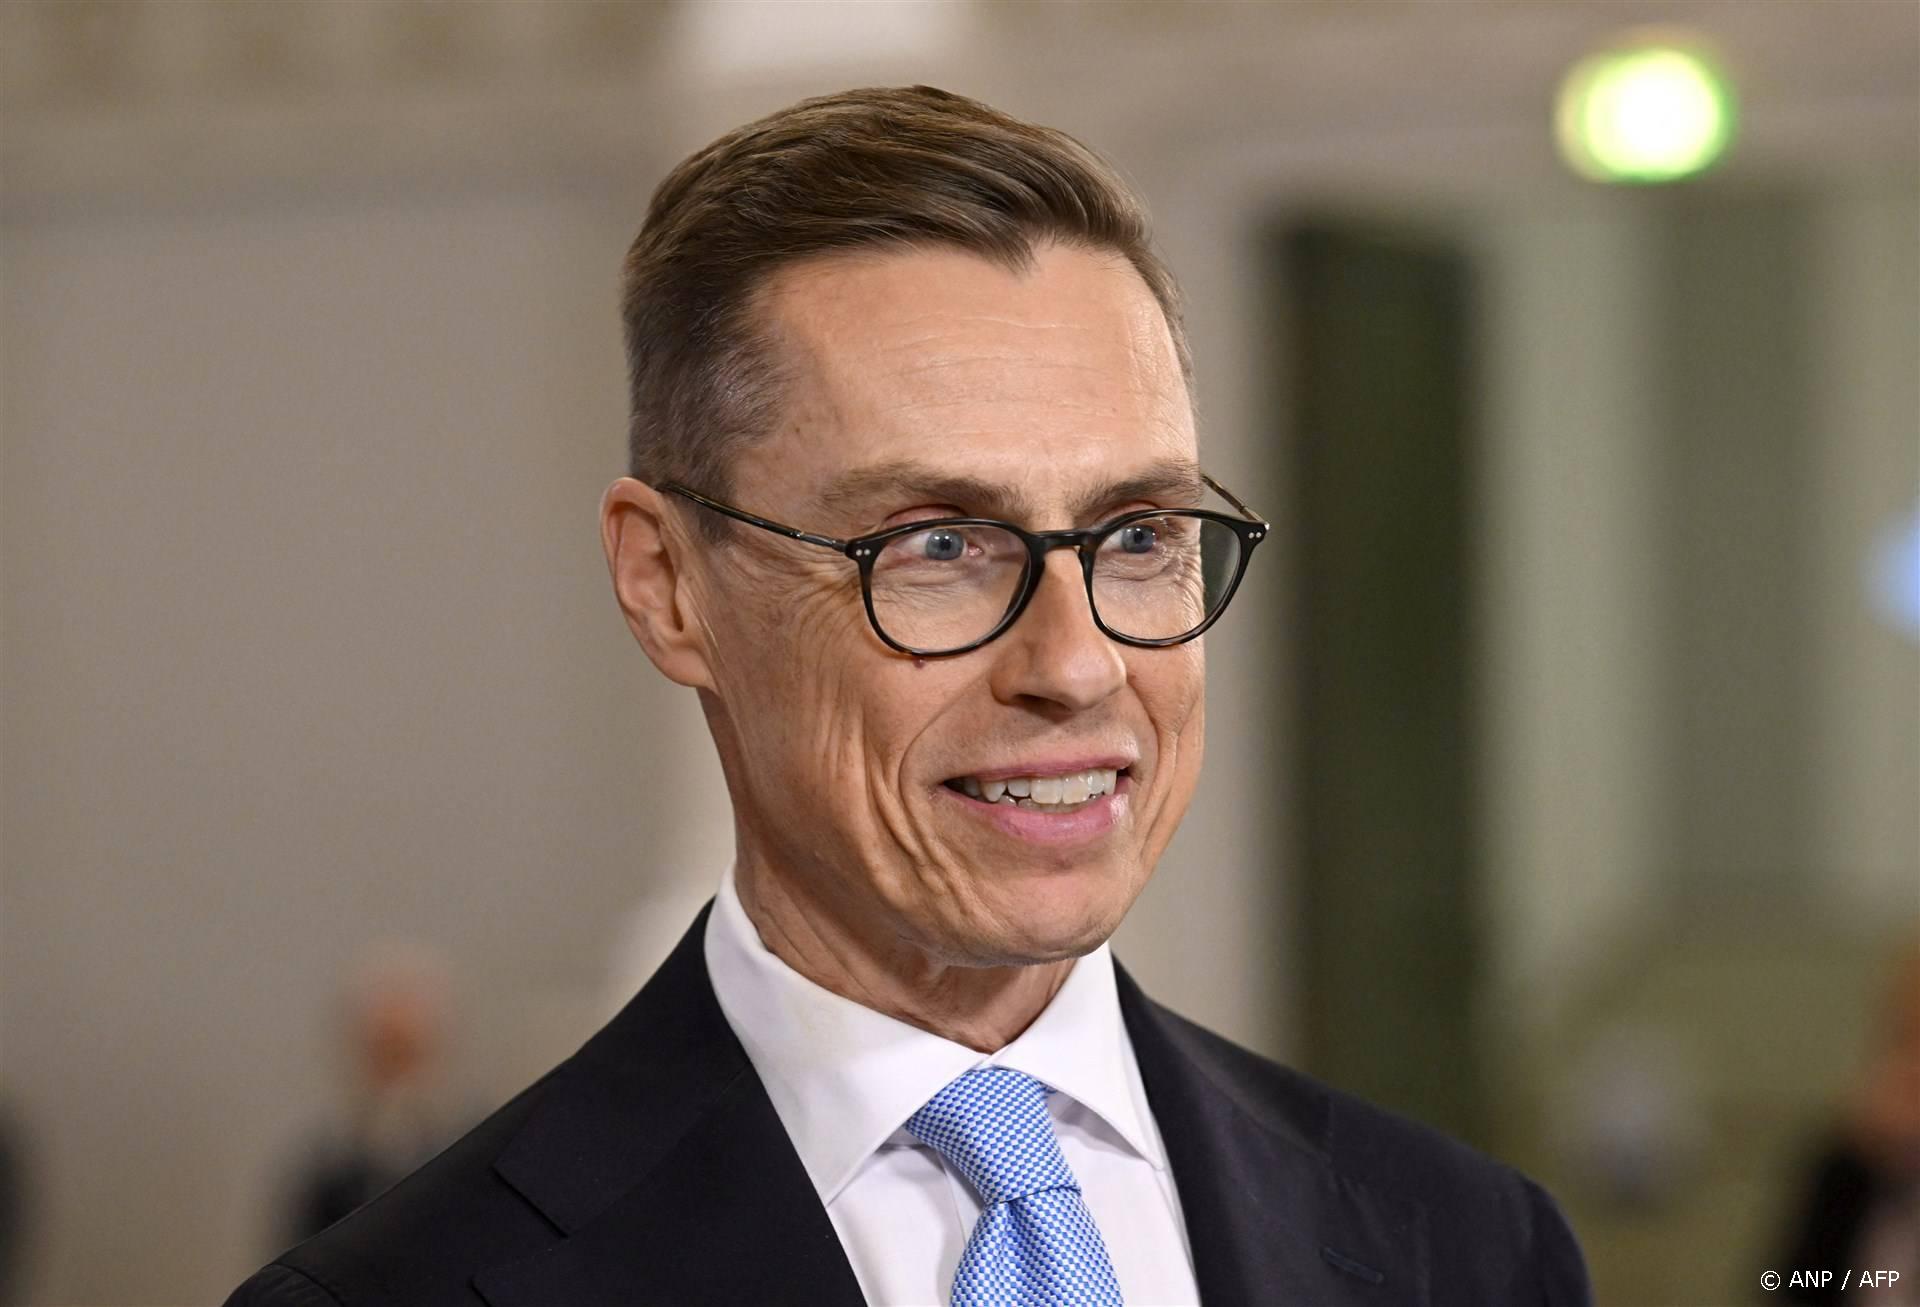 Finnish former prime minister and candidate of the National Coalition Party NCP Alexander Stubb take part in an the Presidential election night debate at the City Hall in Helsinki, Finland, during the first round of the presidential election, on January 28, 2024. Finns went to the polls to elect a new president, an office whose importance has grown on increased tensions with neighbouring Russia since the invasion of Ukraine. While the president's powers are limited, the head of state -- who also acts as supreme commander of Finland's armed forces -- helps direct foreign policy in collaboration with the government, meaning the changing geopolitical landscape in Europe will be the main concern for the winner.
Markku Ulander / Lehtikuva / AFP